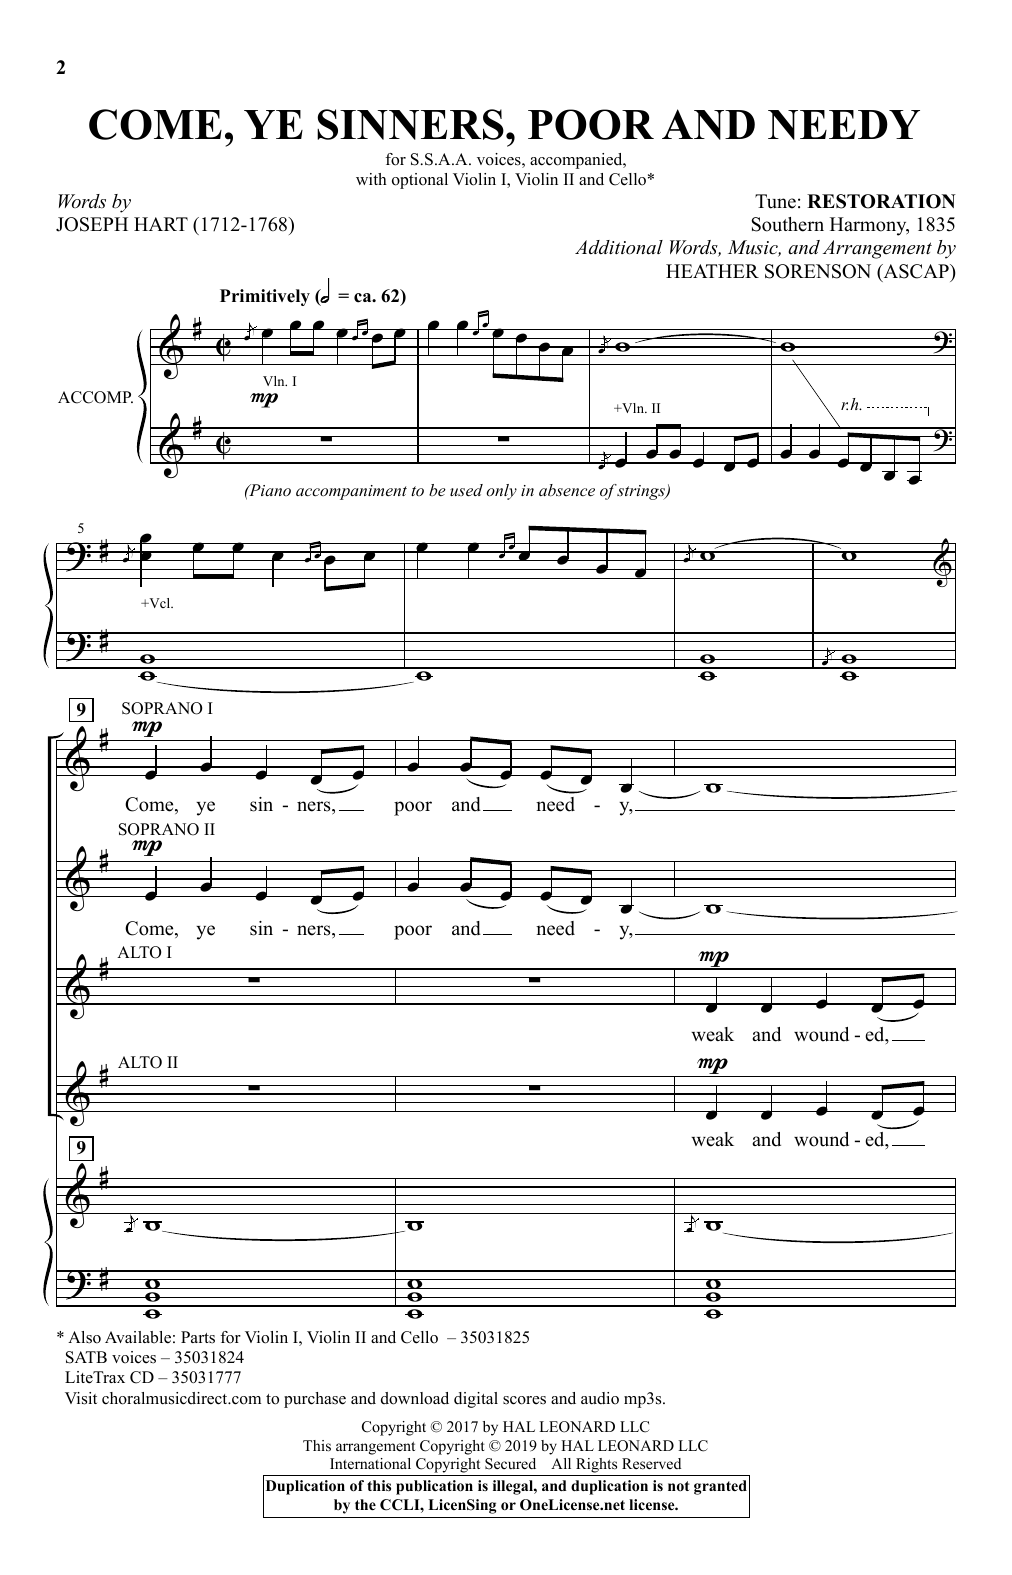 Download Joseph Hart and Heather Sorenson Come, Ye Sinners, Poor And Needy (arr. Sheet Music